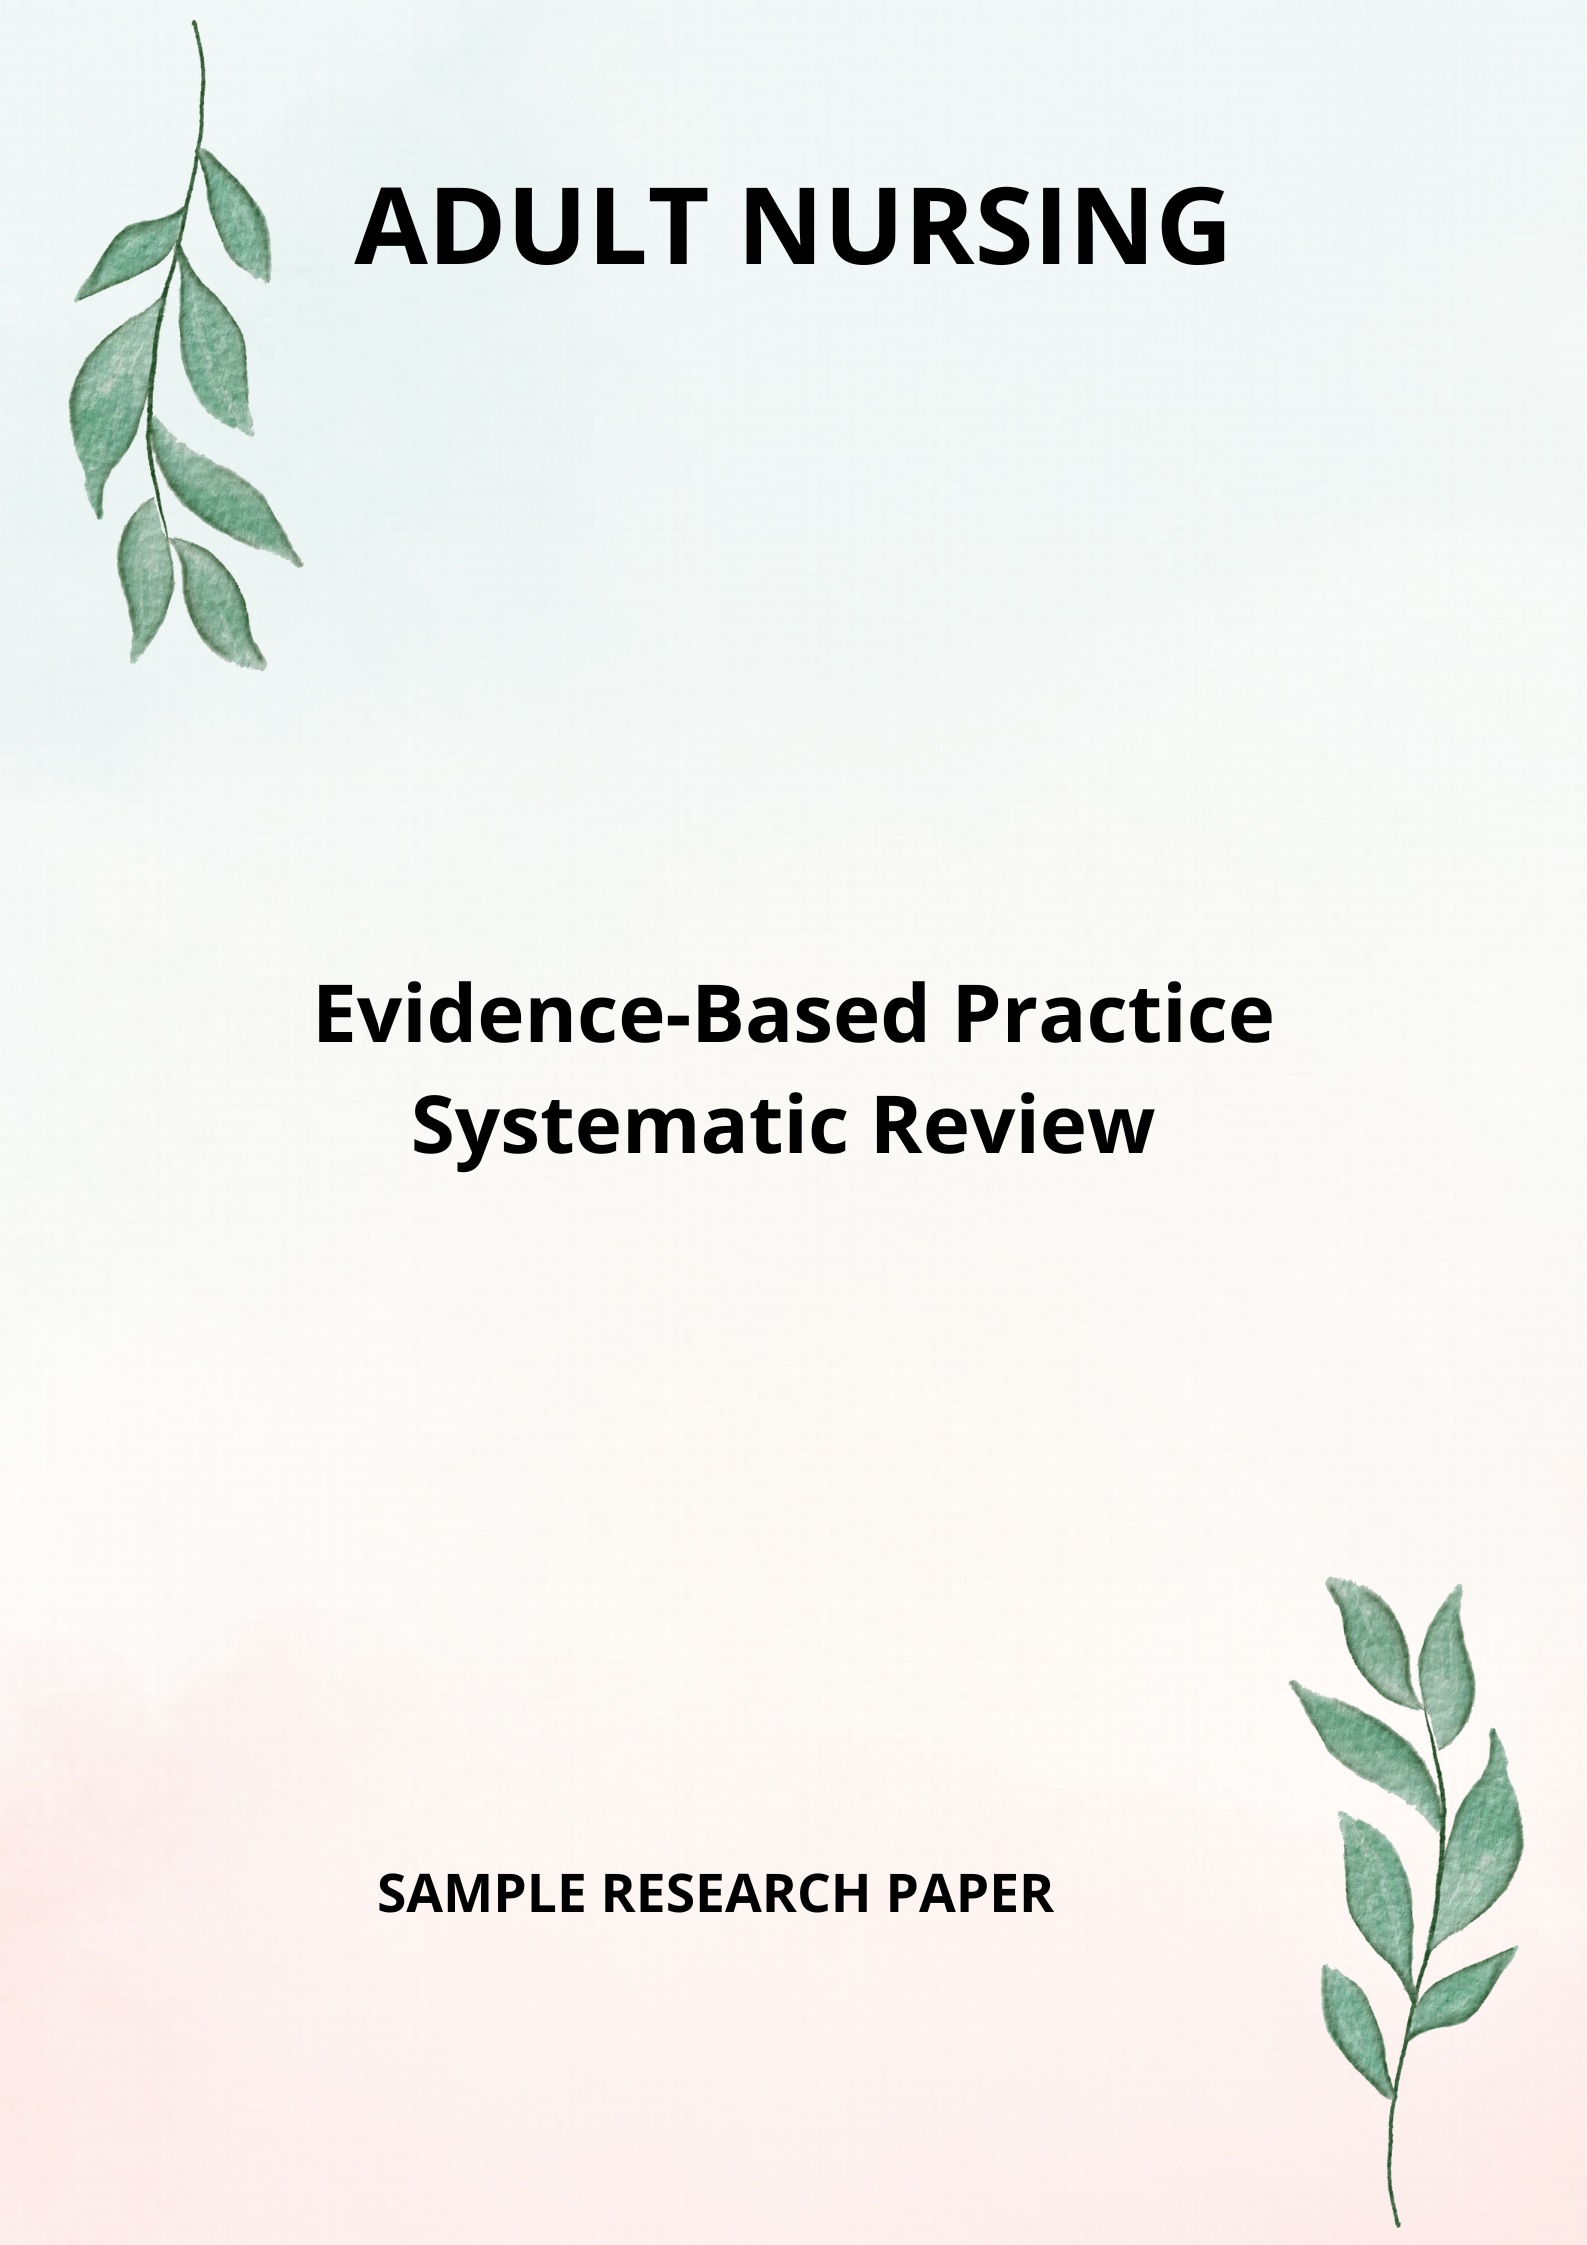 nursing evidence based practice research paper topics